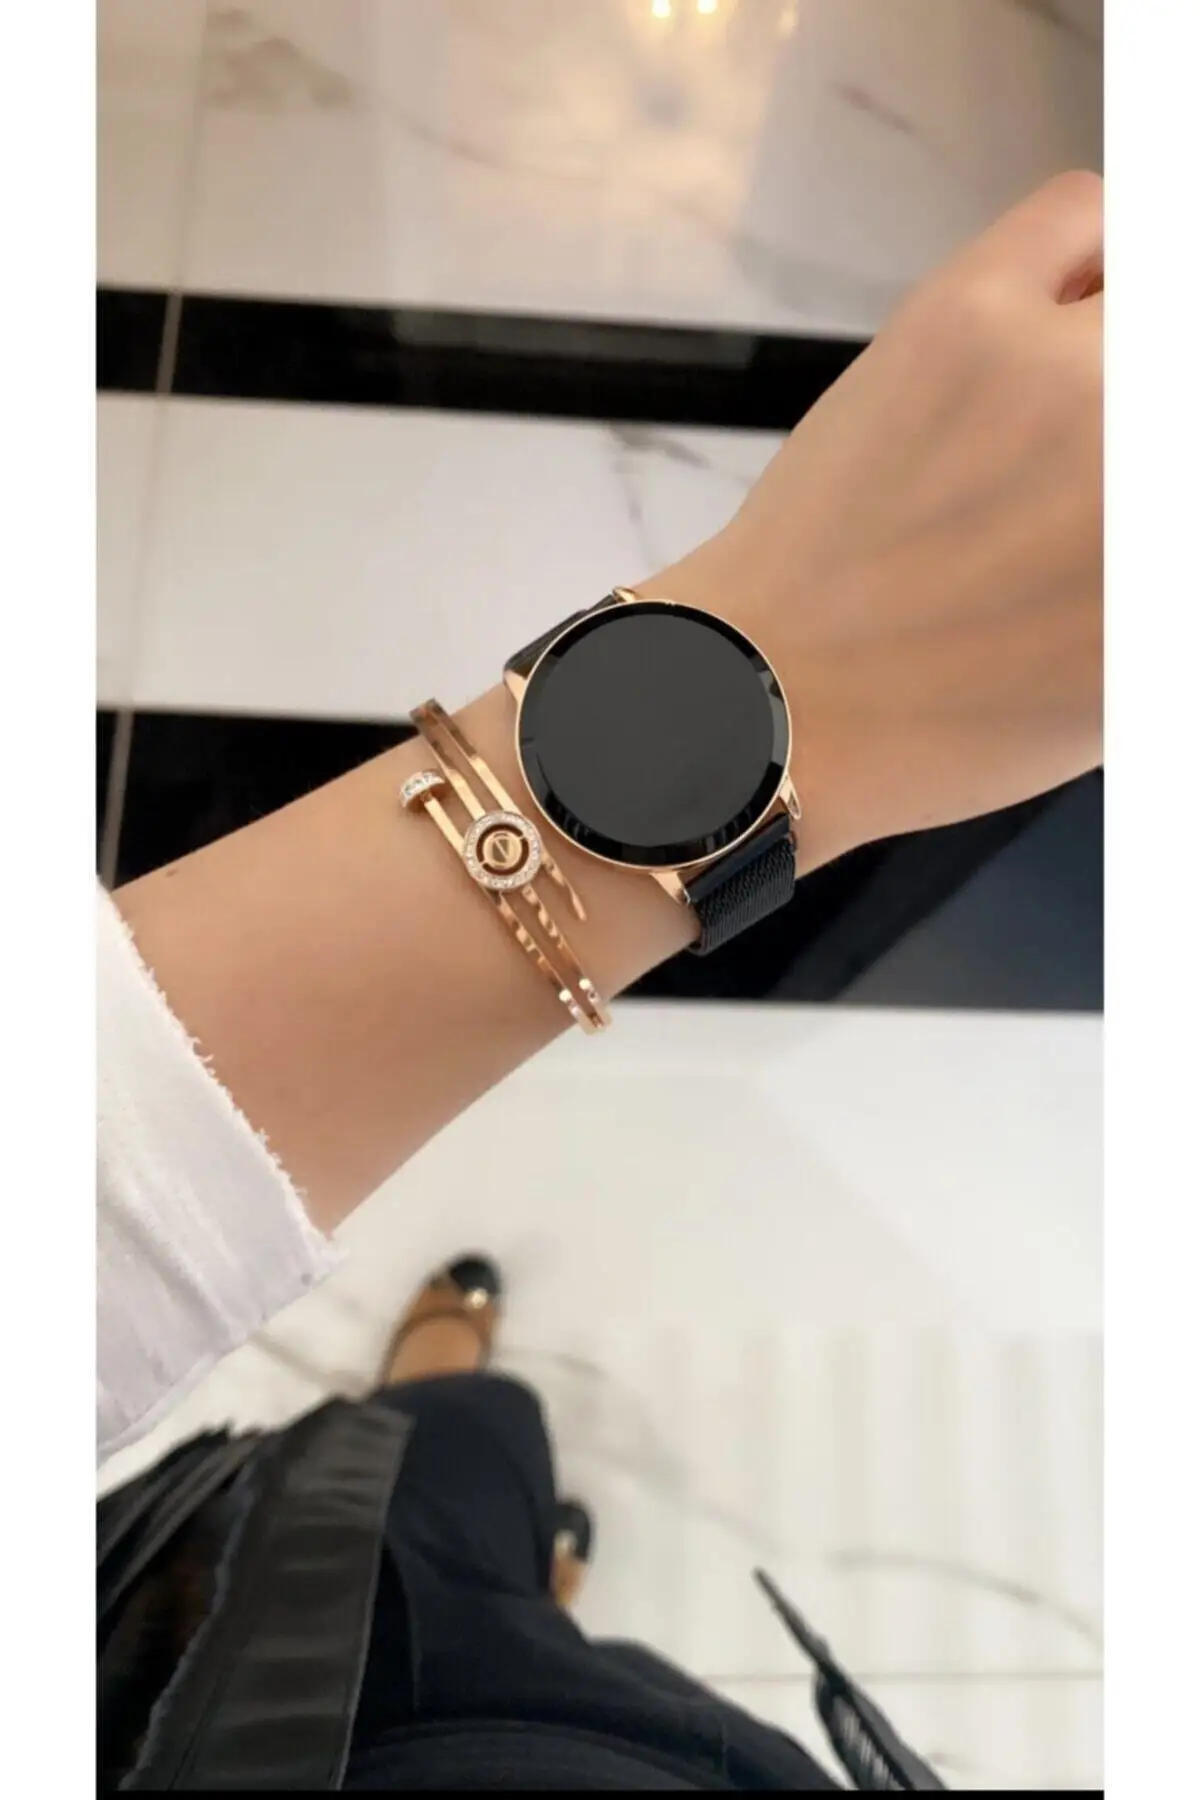 Women's Waterproof Touch Wristwatch Metal Strap Steel Case Design Watches Gift Charms Birthday Christmas Father's Day